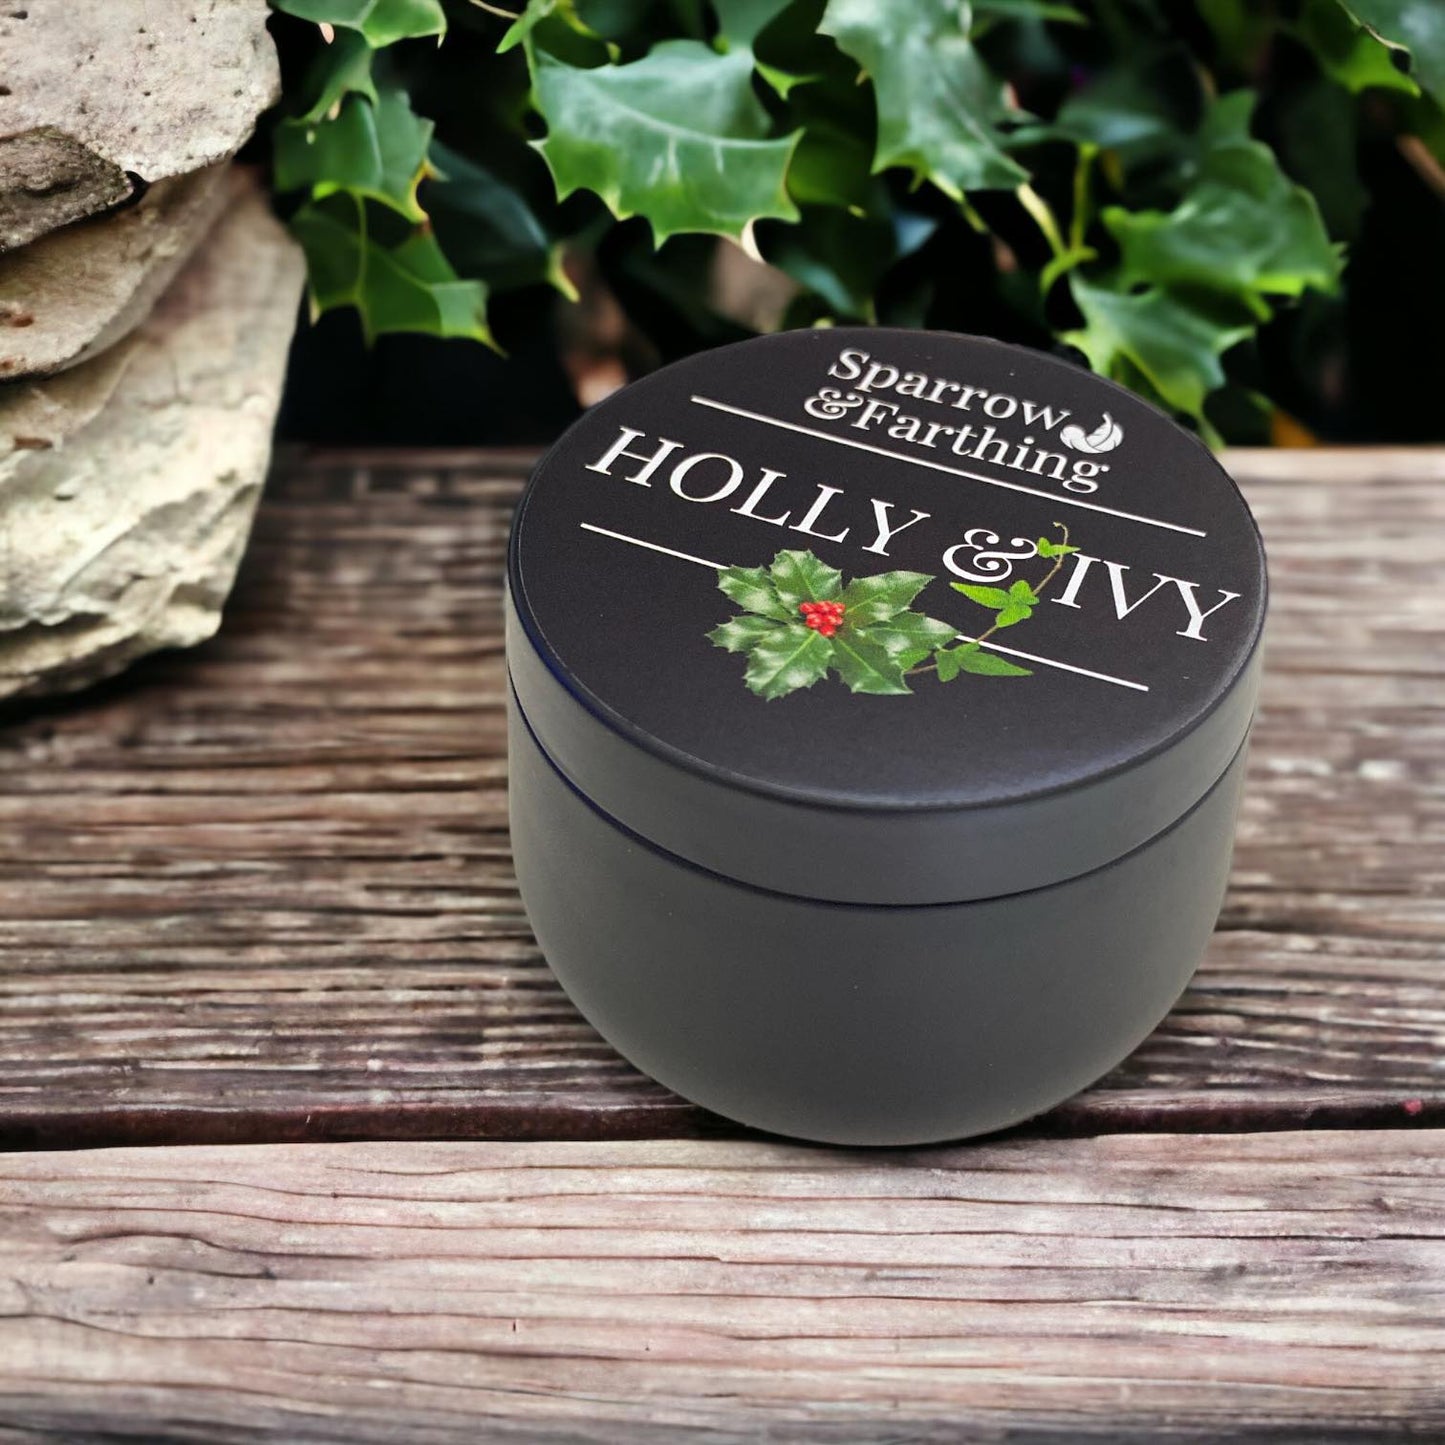 Holly & Ivy Candle